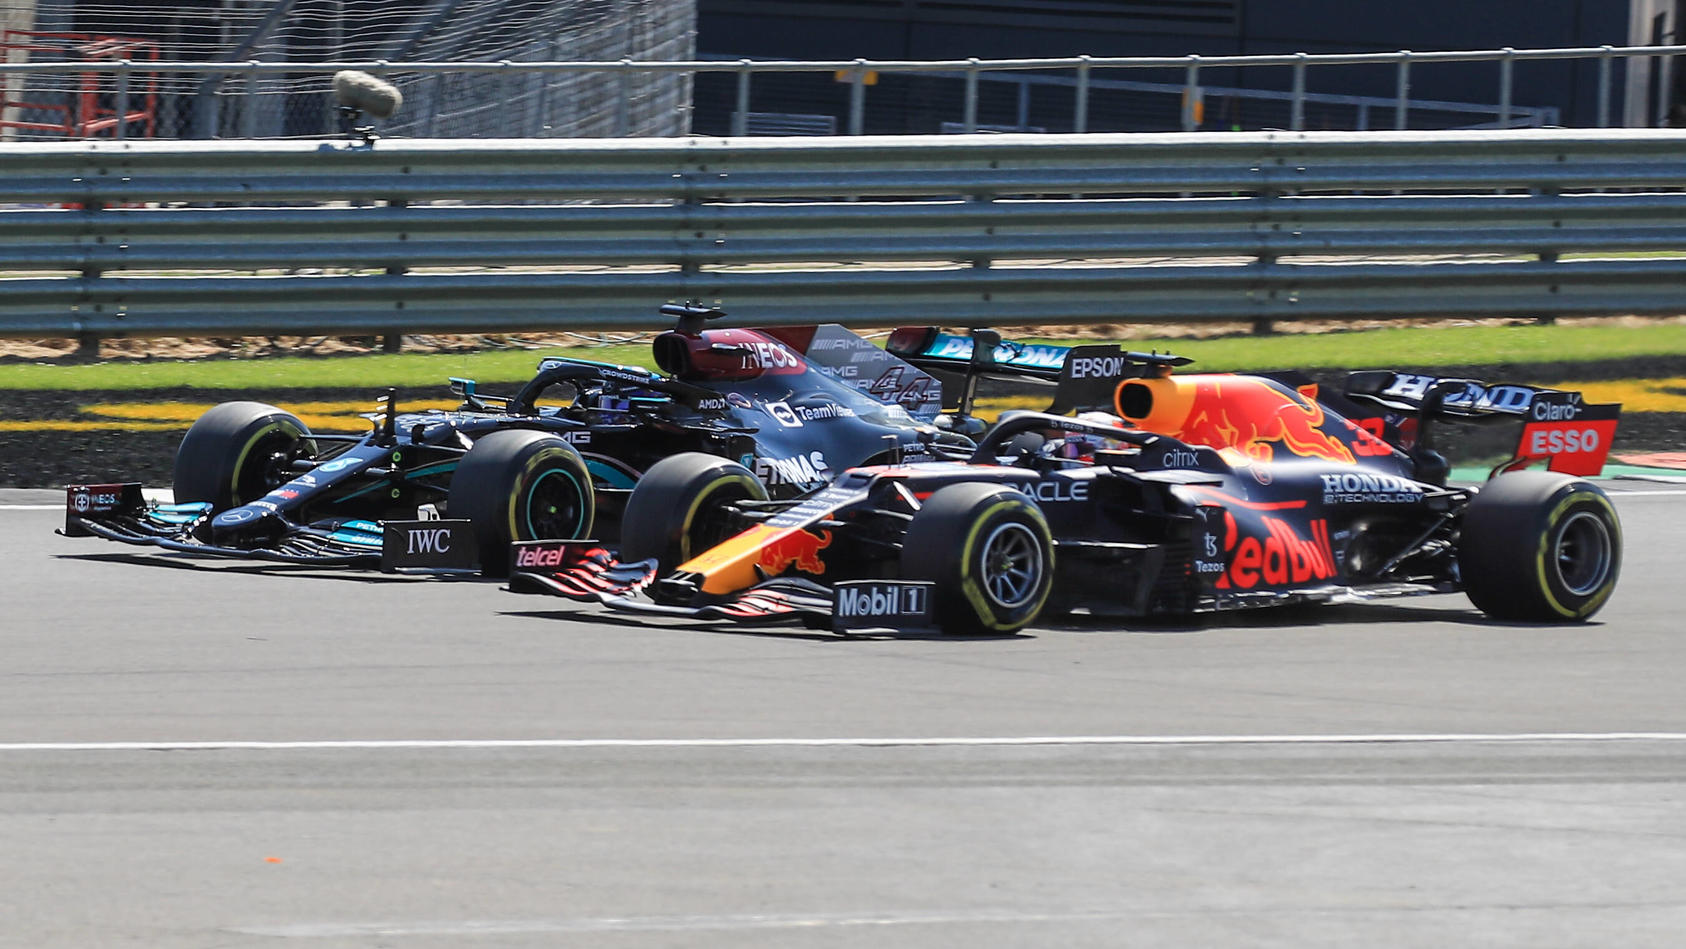 Sport Bilder des Tages FORMULA 1 BRITISH GRAND PRIX, 18/07/2021 Silverstone Circuit,18 July 2021 Lewis Hamilton GBR, Mercedes AMG Petronas W12 overtakes Max Verstappen NED, Red Bull Racing RB16B on the first turn at the start of the race during the F